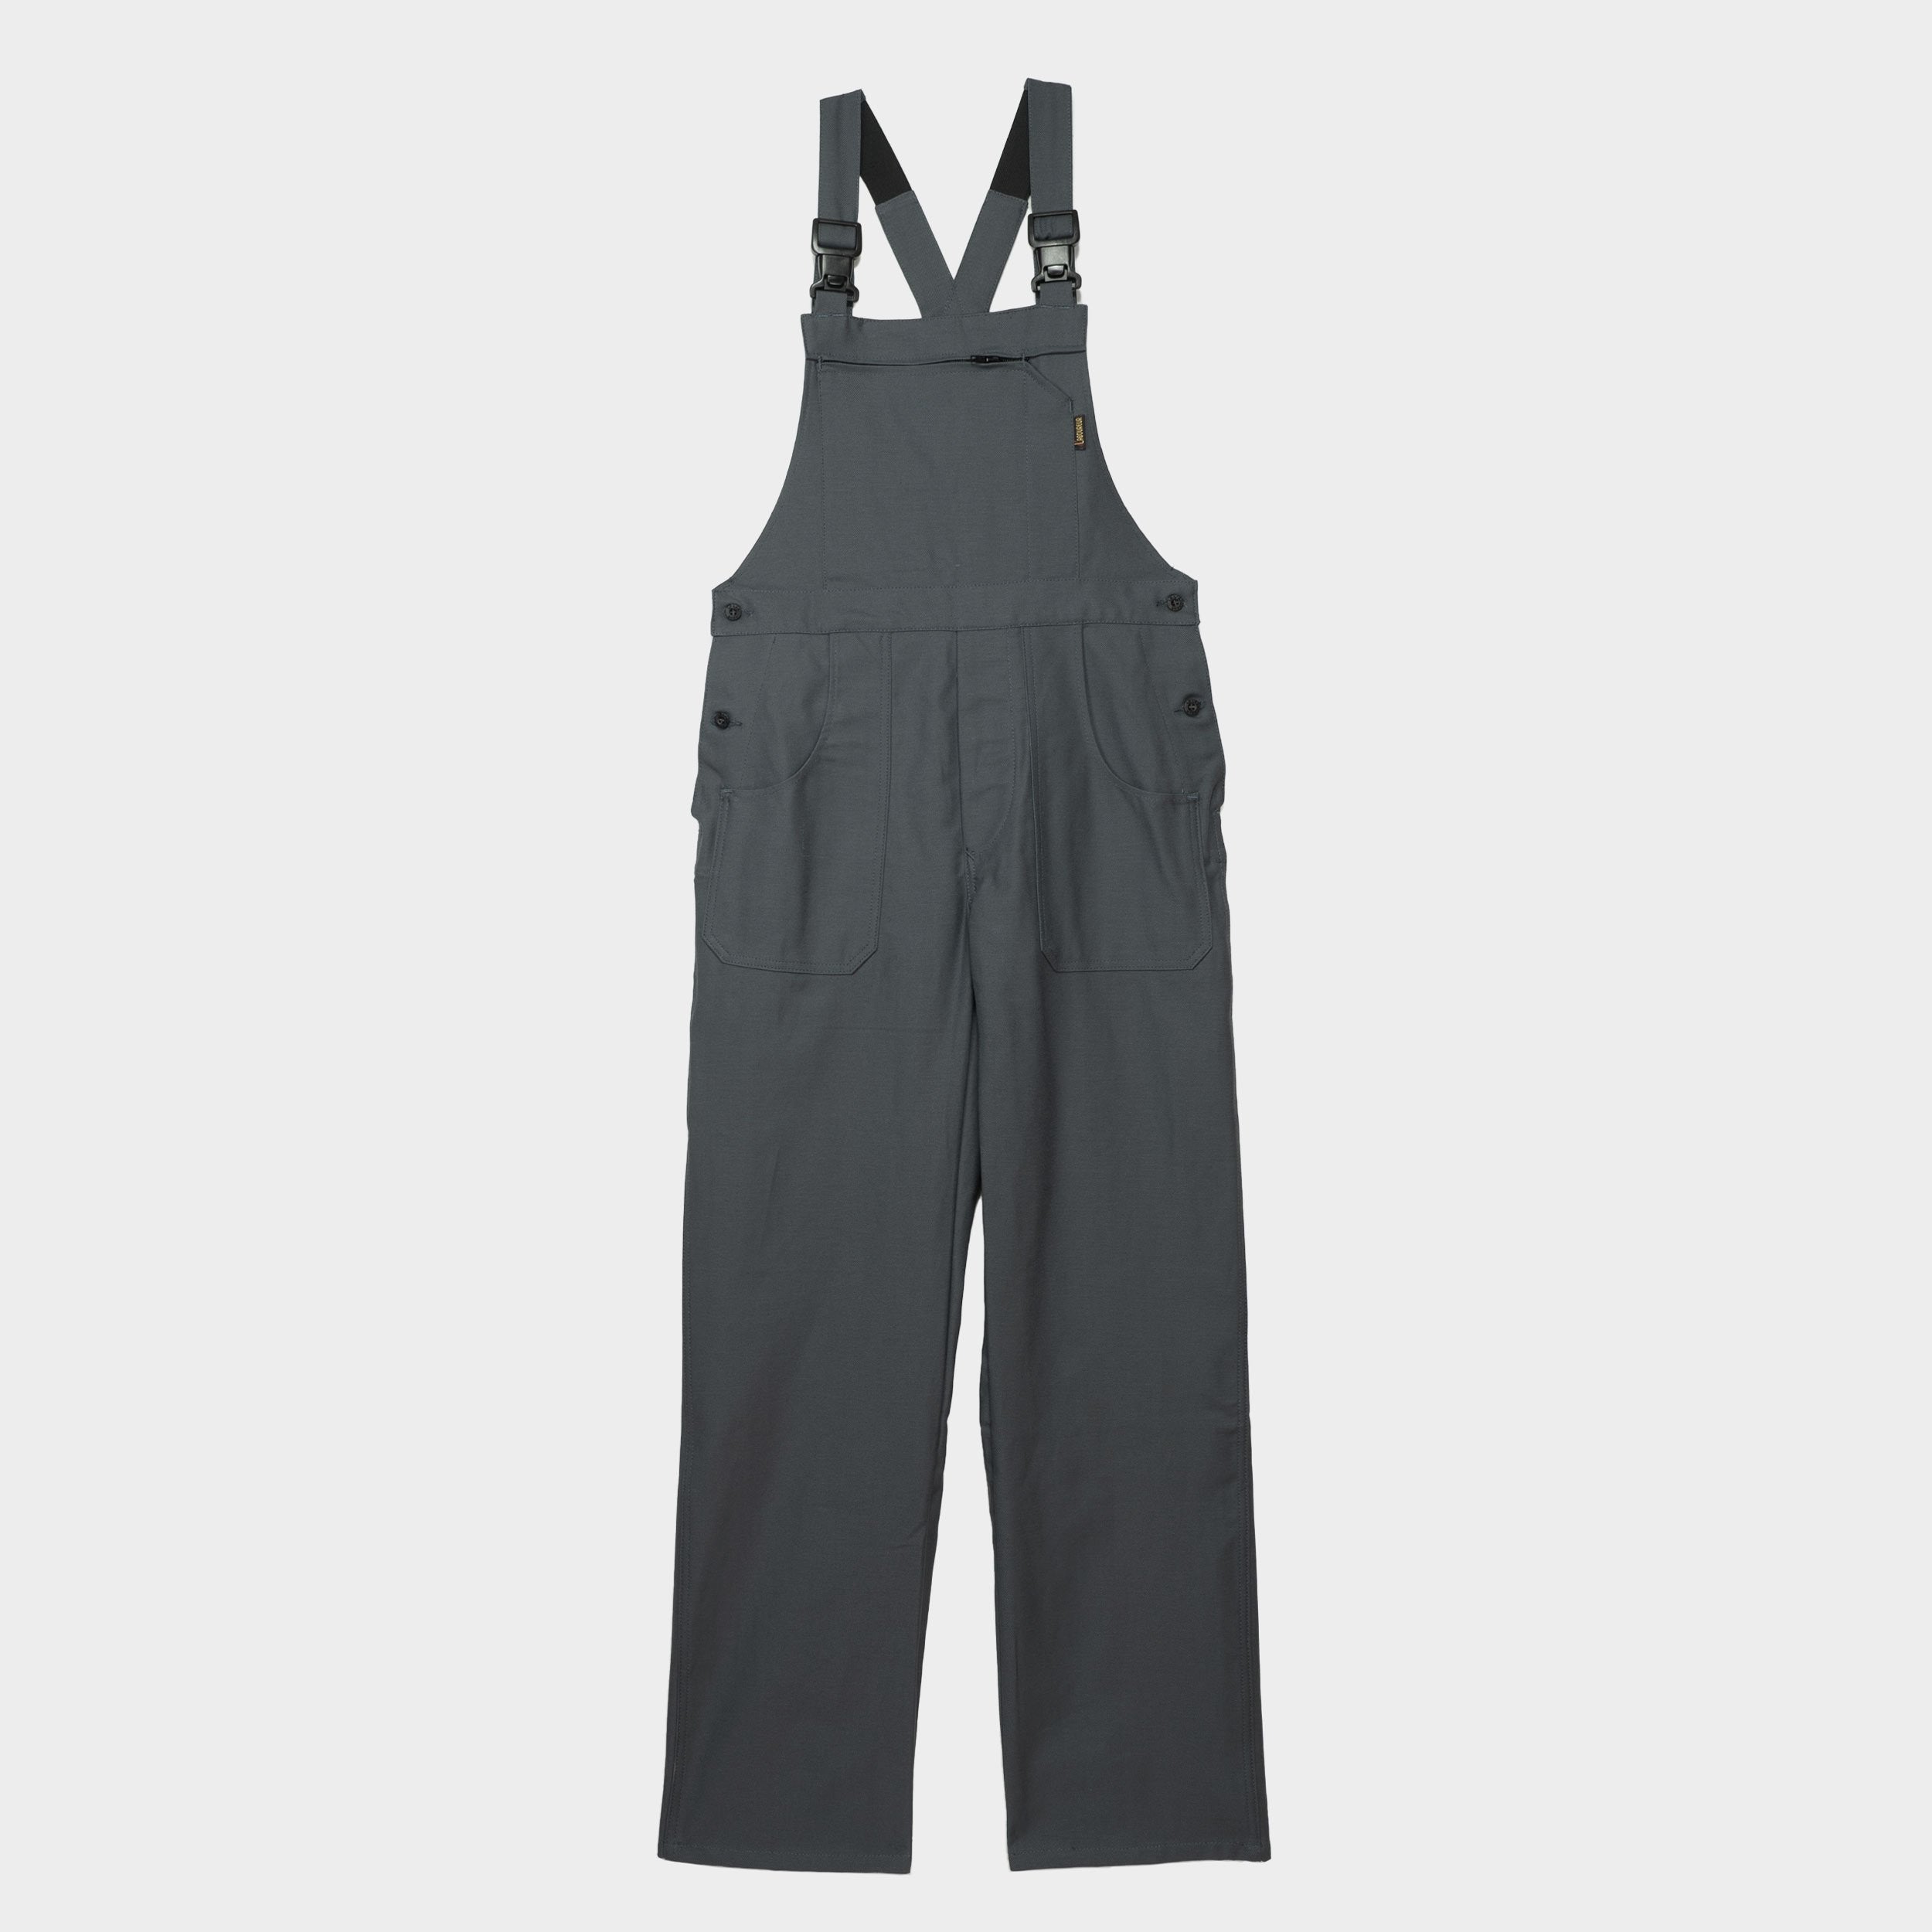 Le Laboureur for Gardenheir French Cotton Overalls in Grey